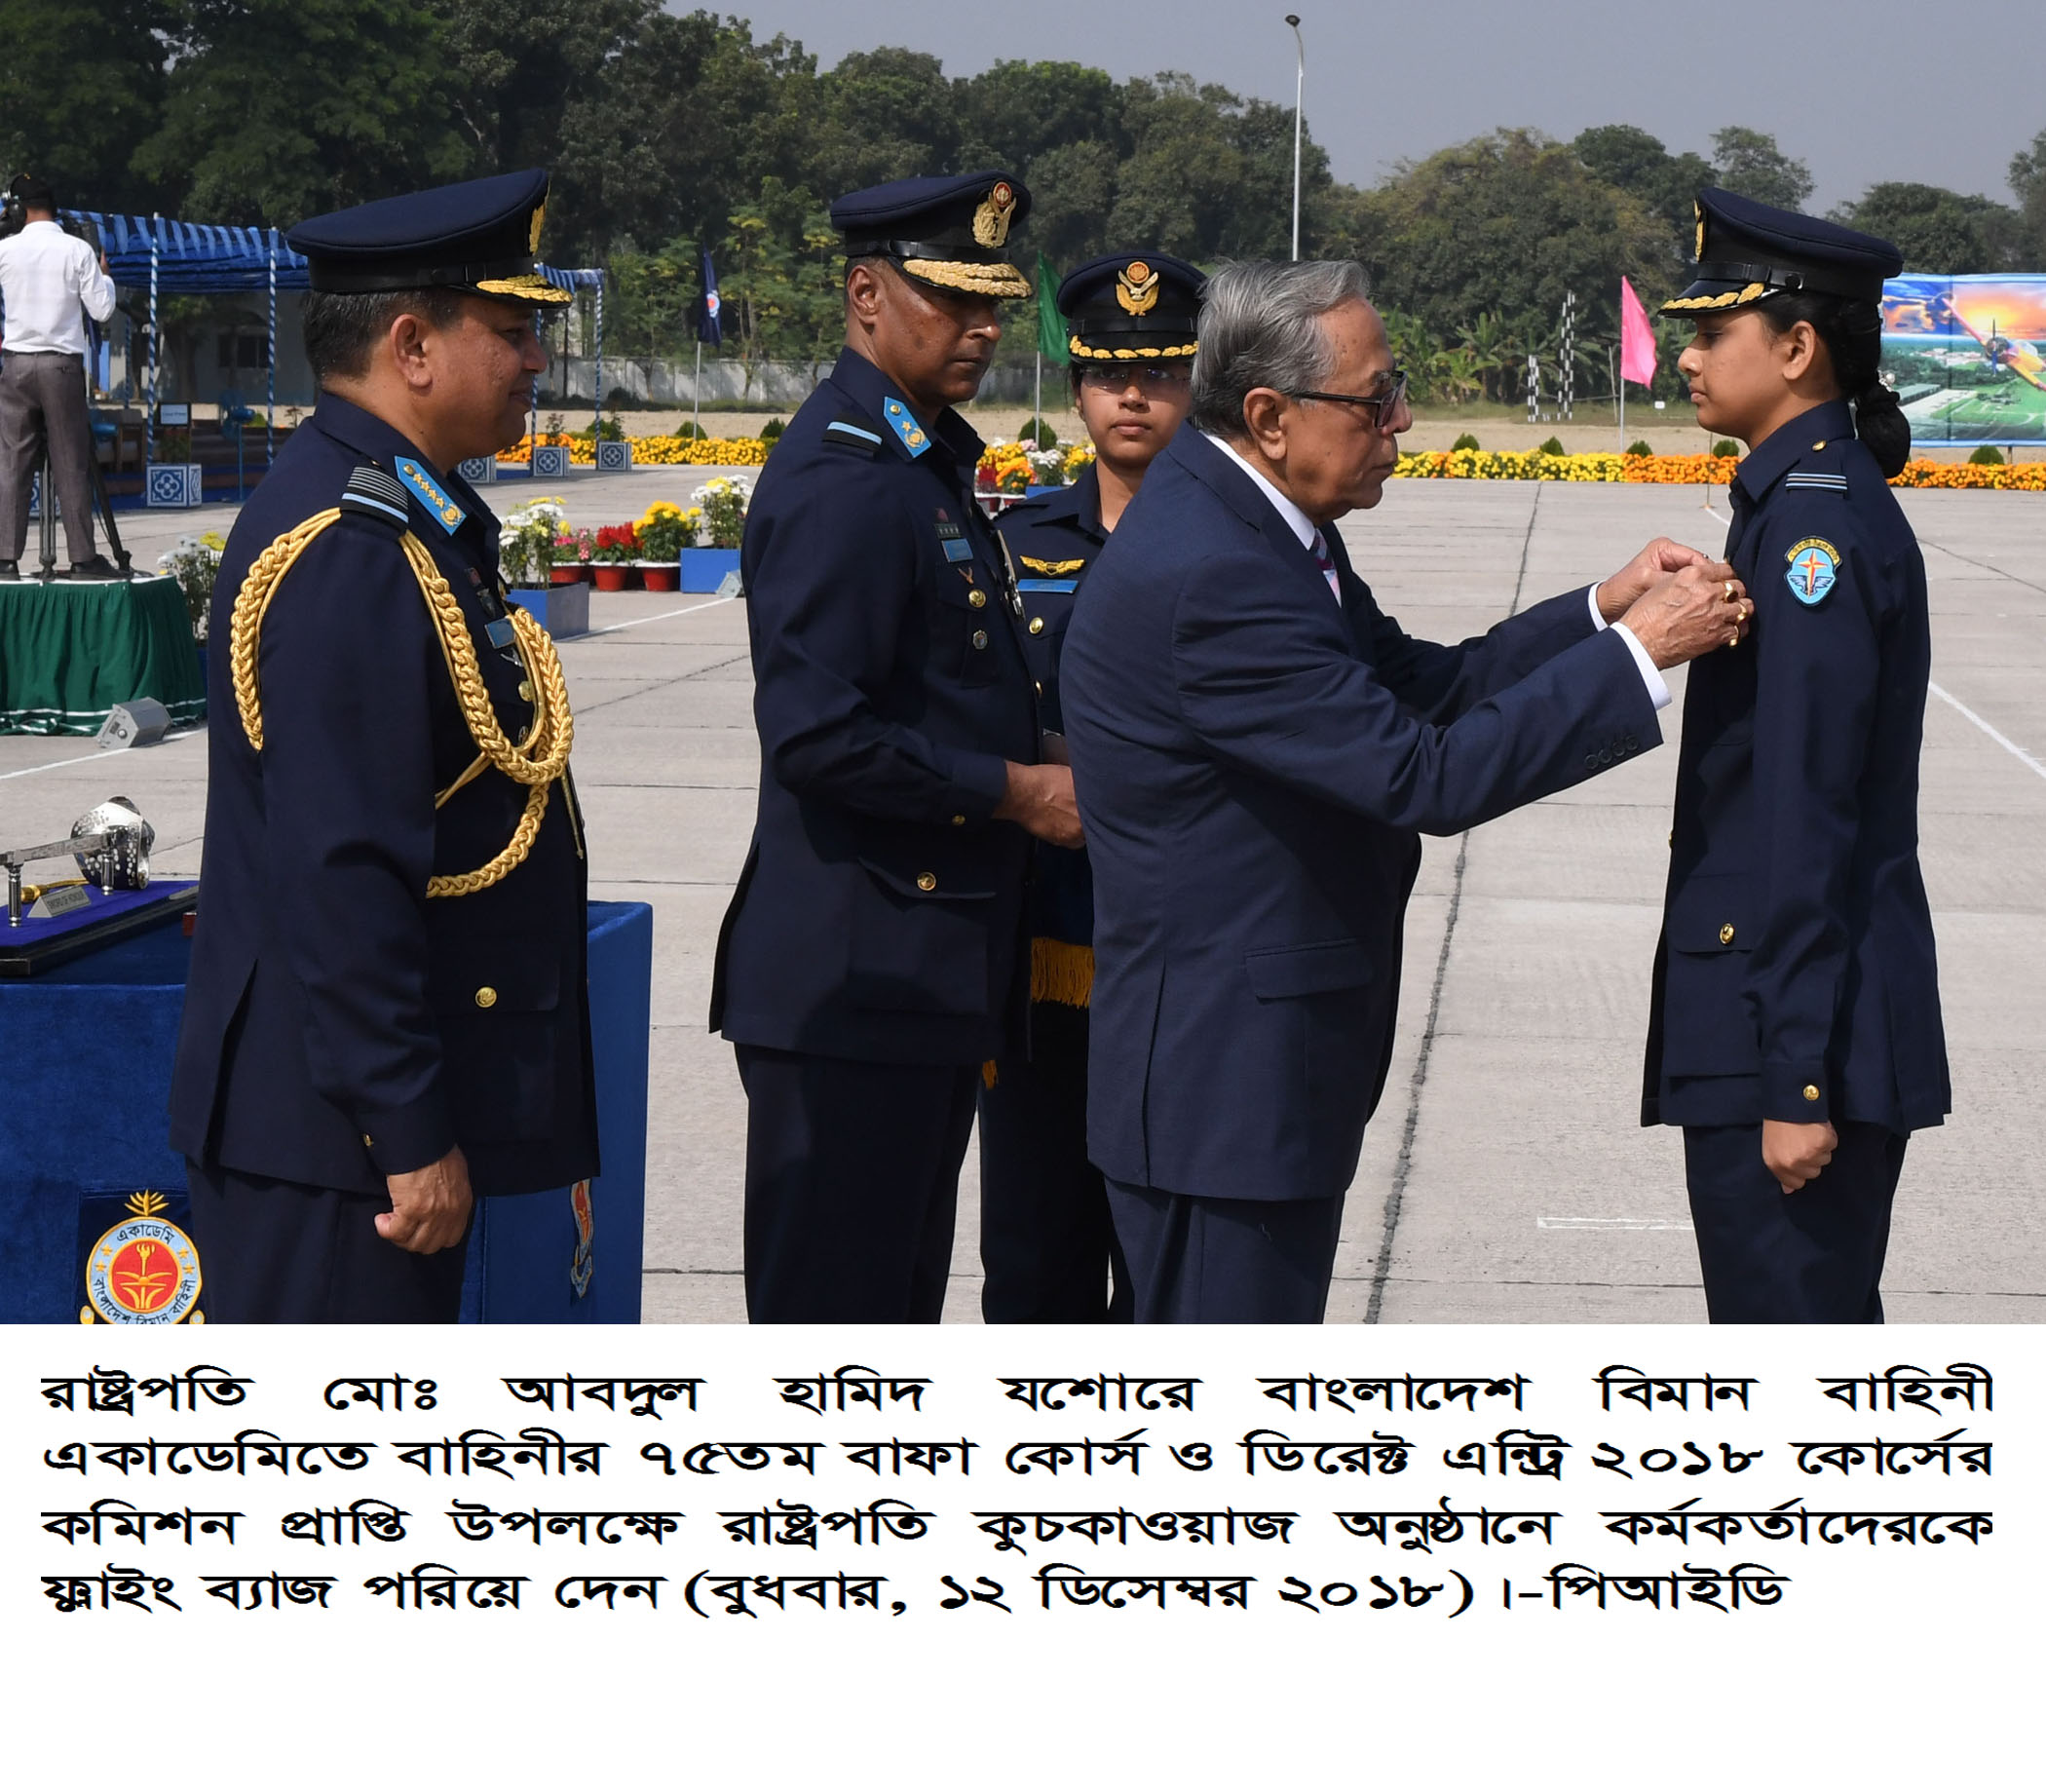 Bangladesh Air Force is a country's pride: President Hamid